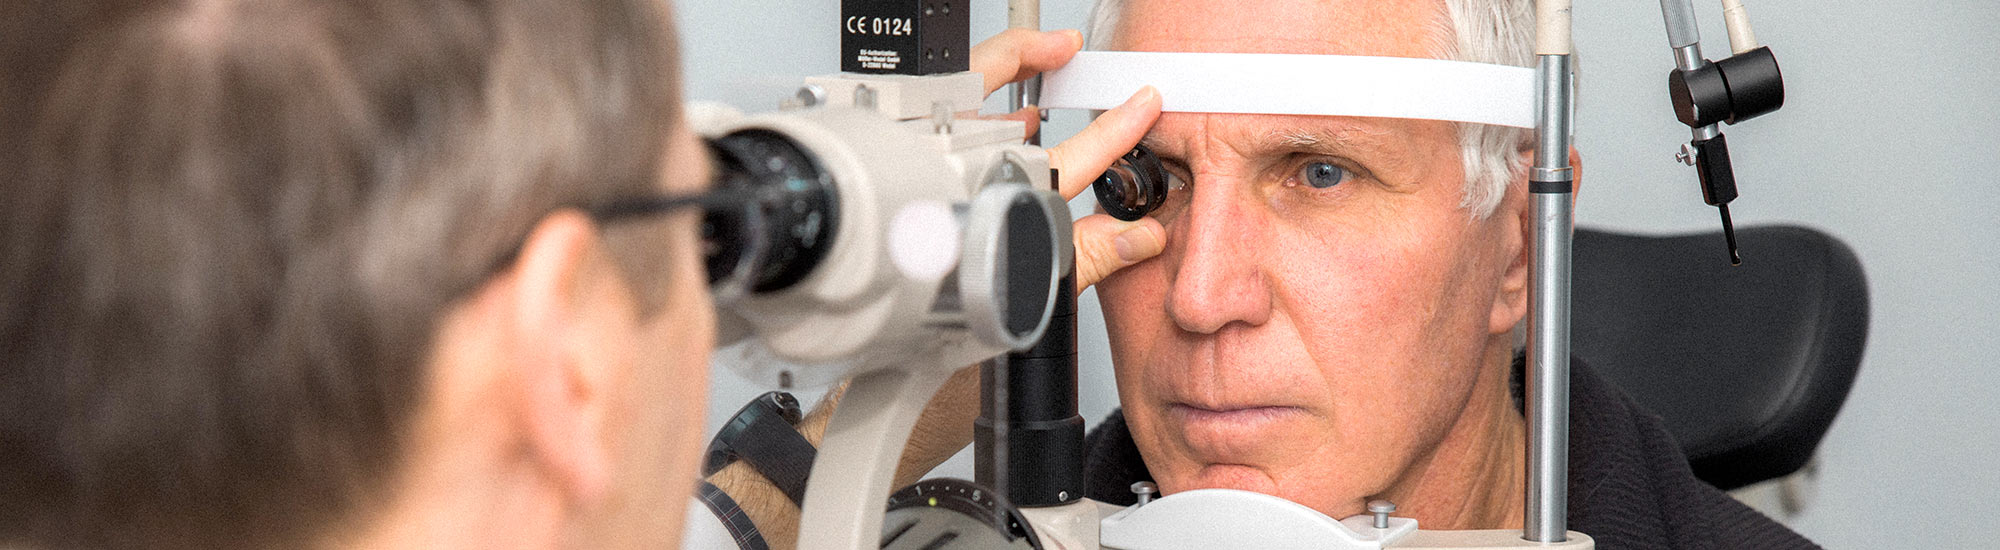 Vestavia Eye Care can treat all your eye care needs